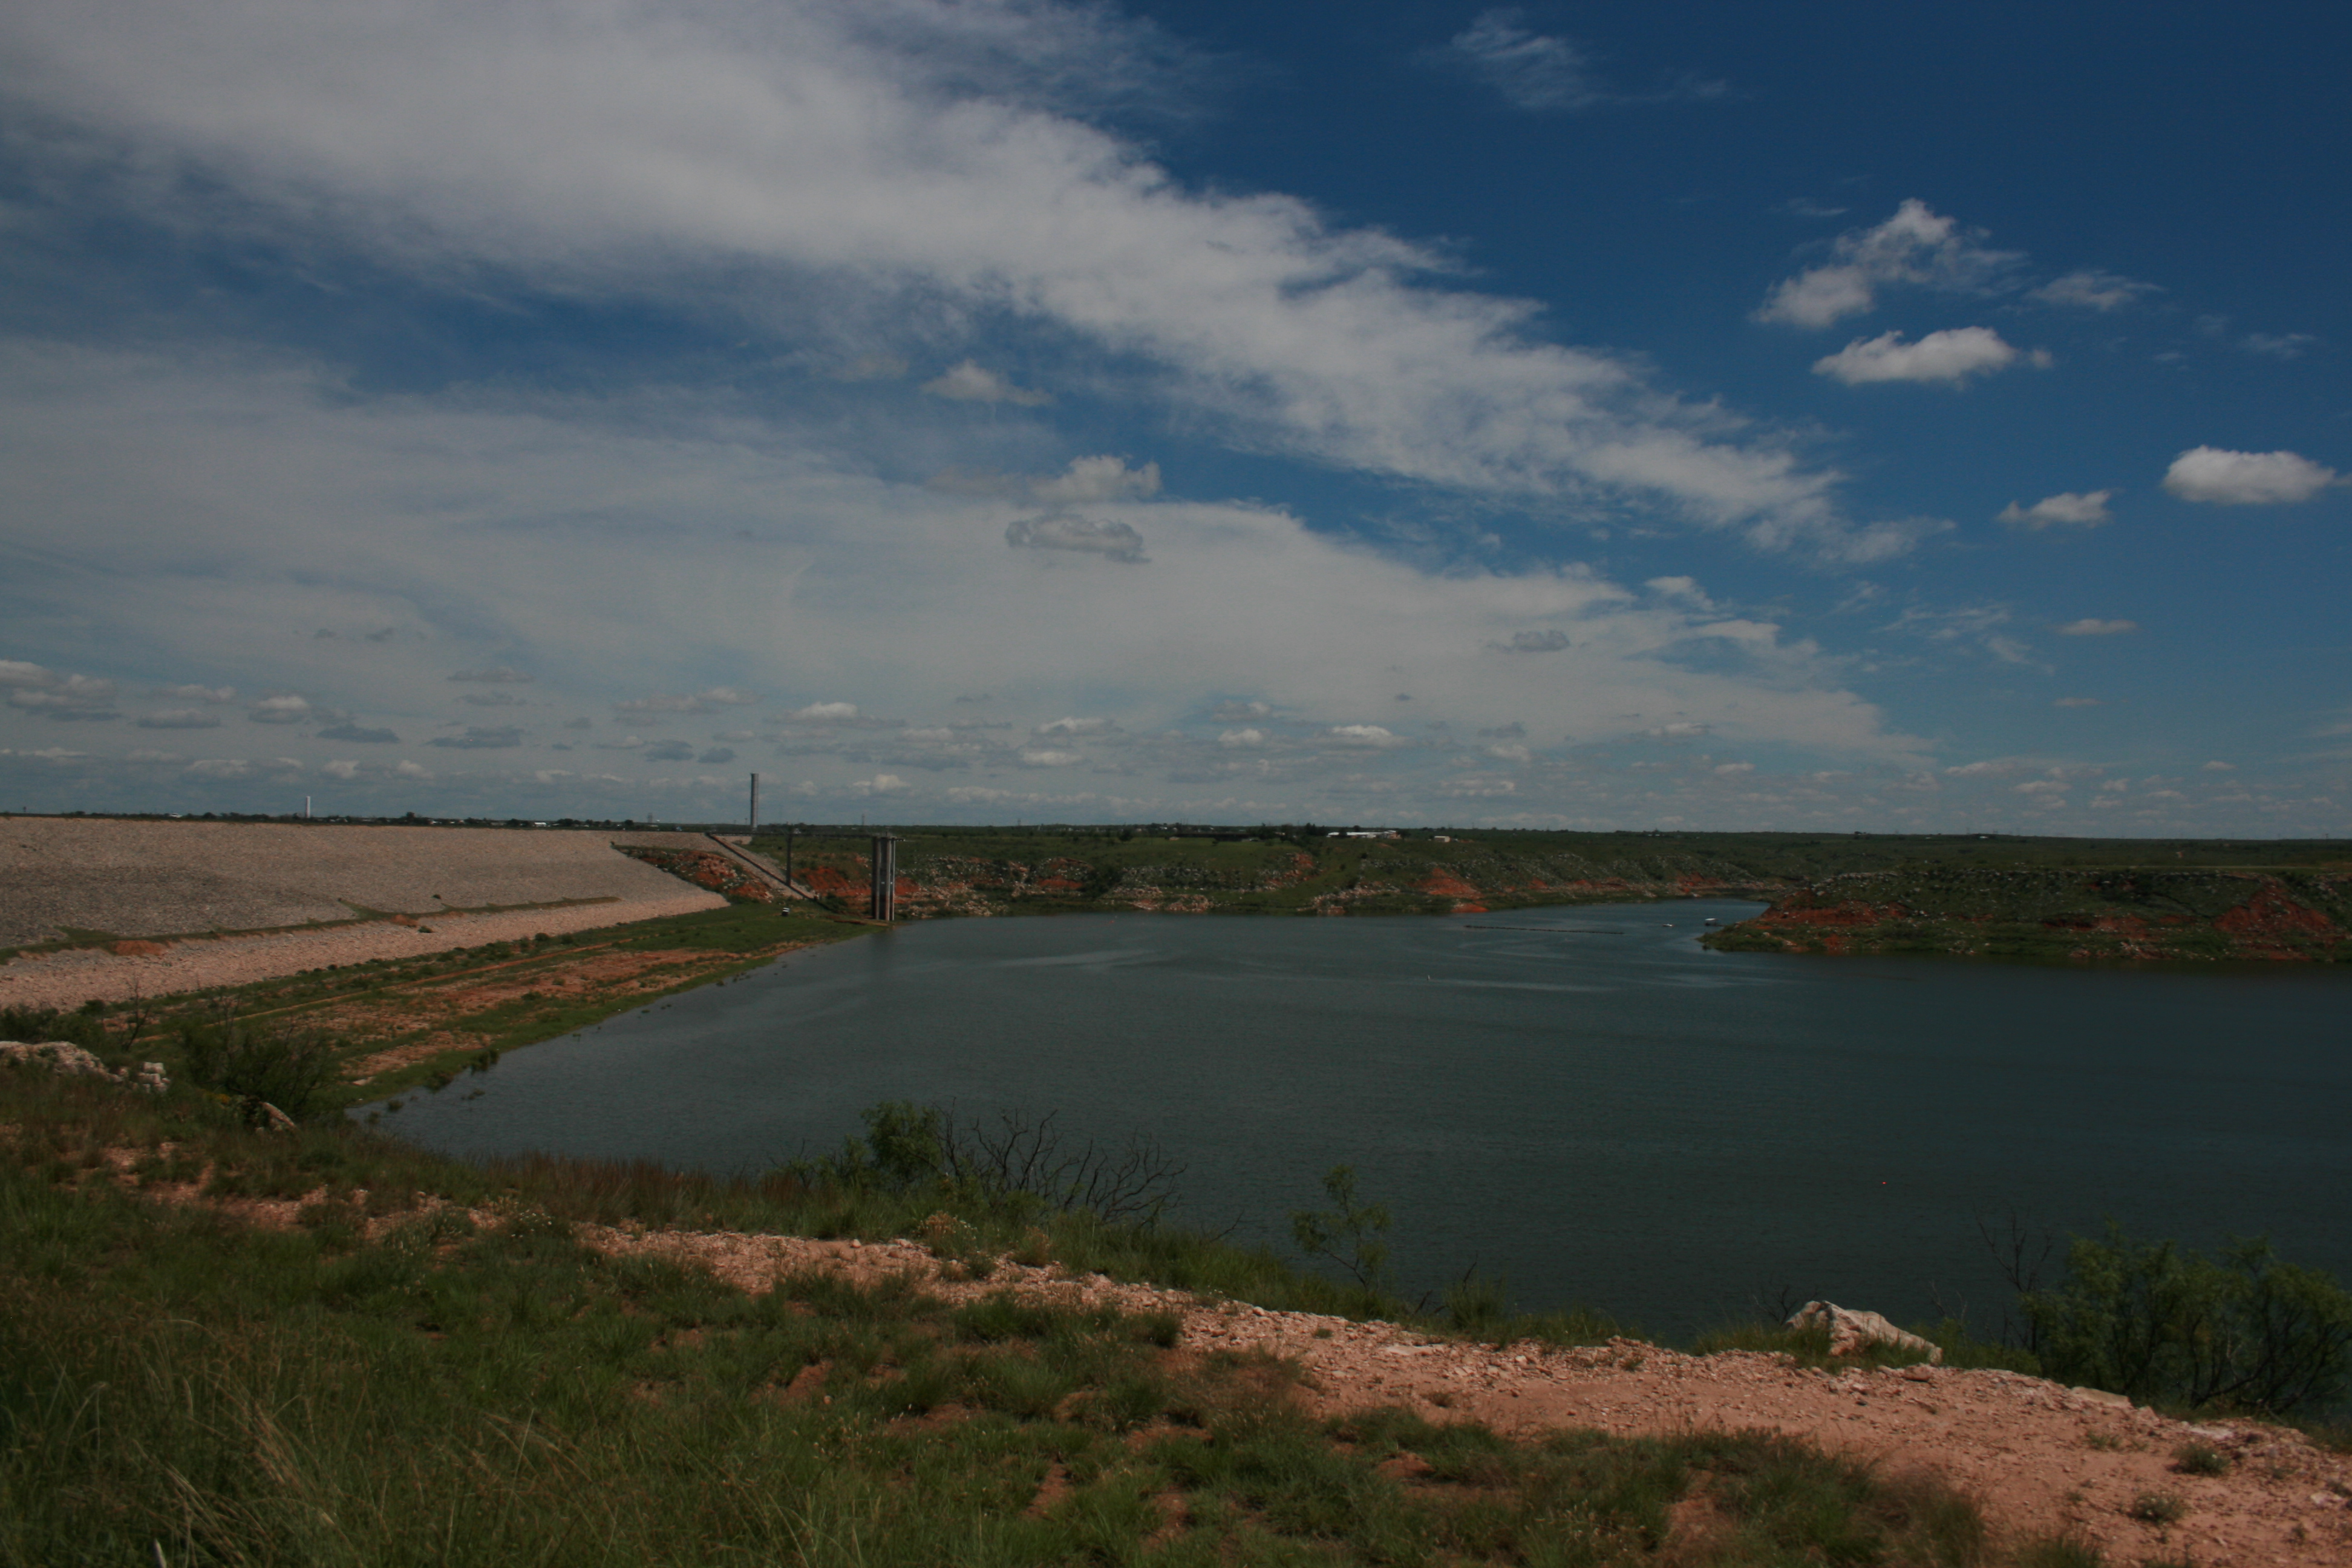 Sanford Dam and Lake Meredith.  The lake is deep blue with white clouds above in the sky.